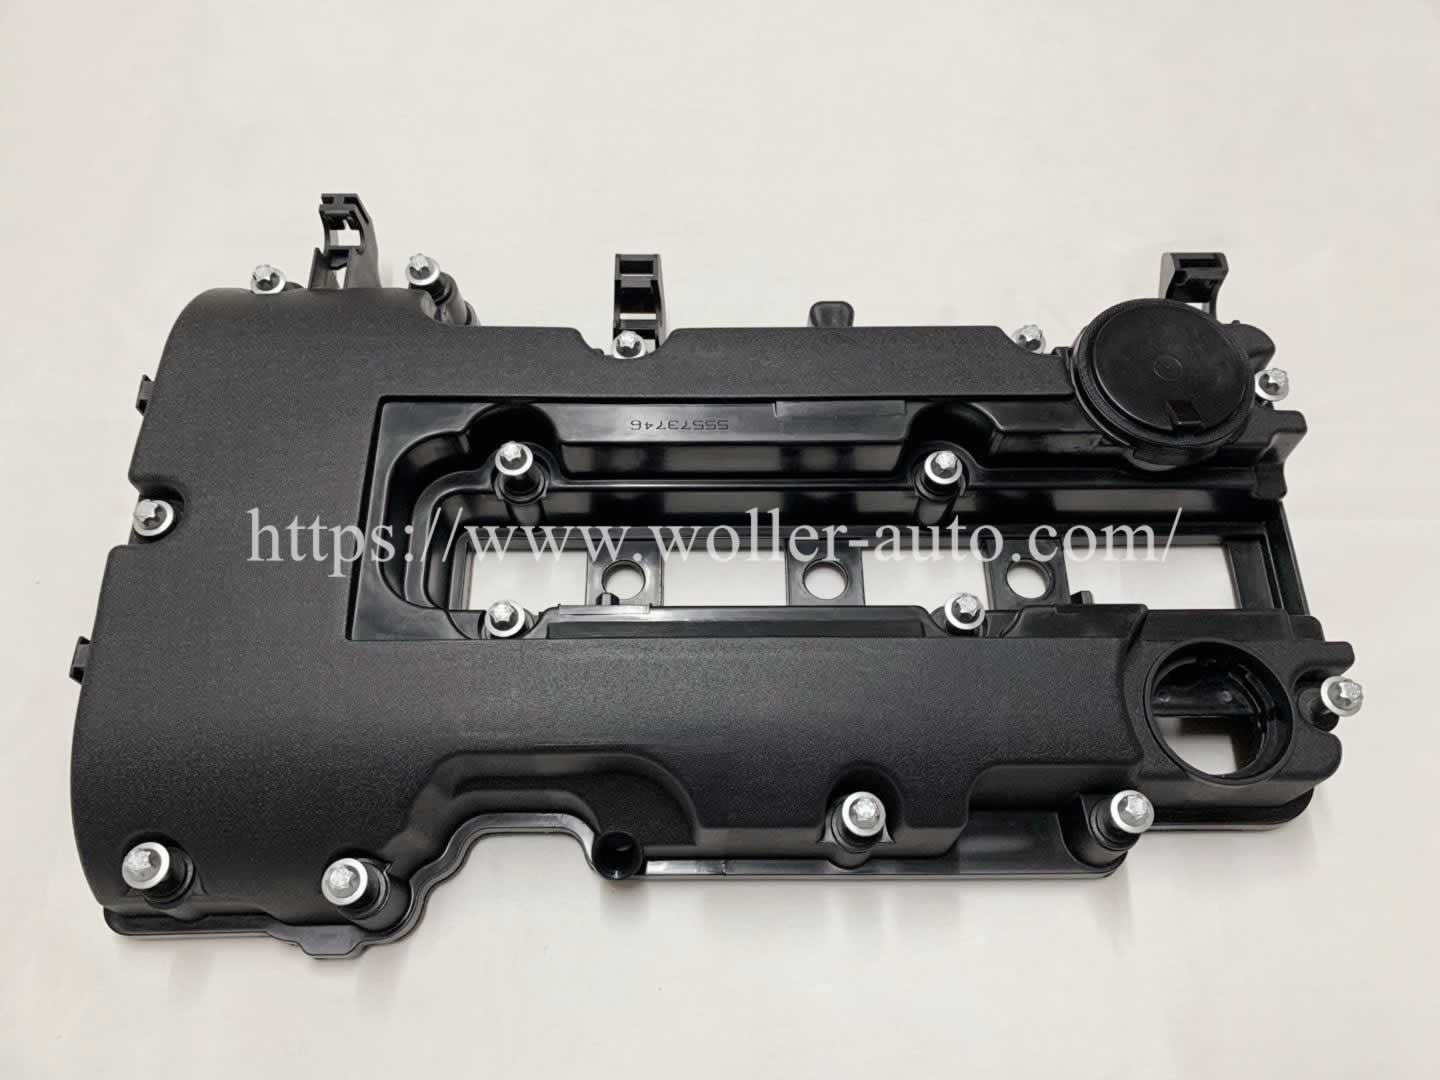 Engine Valve Cover OE 55573746 25198874 Fit For 11-16 GM Buick Encore Cruze Sonic Trax